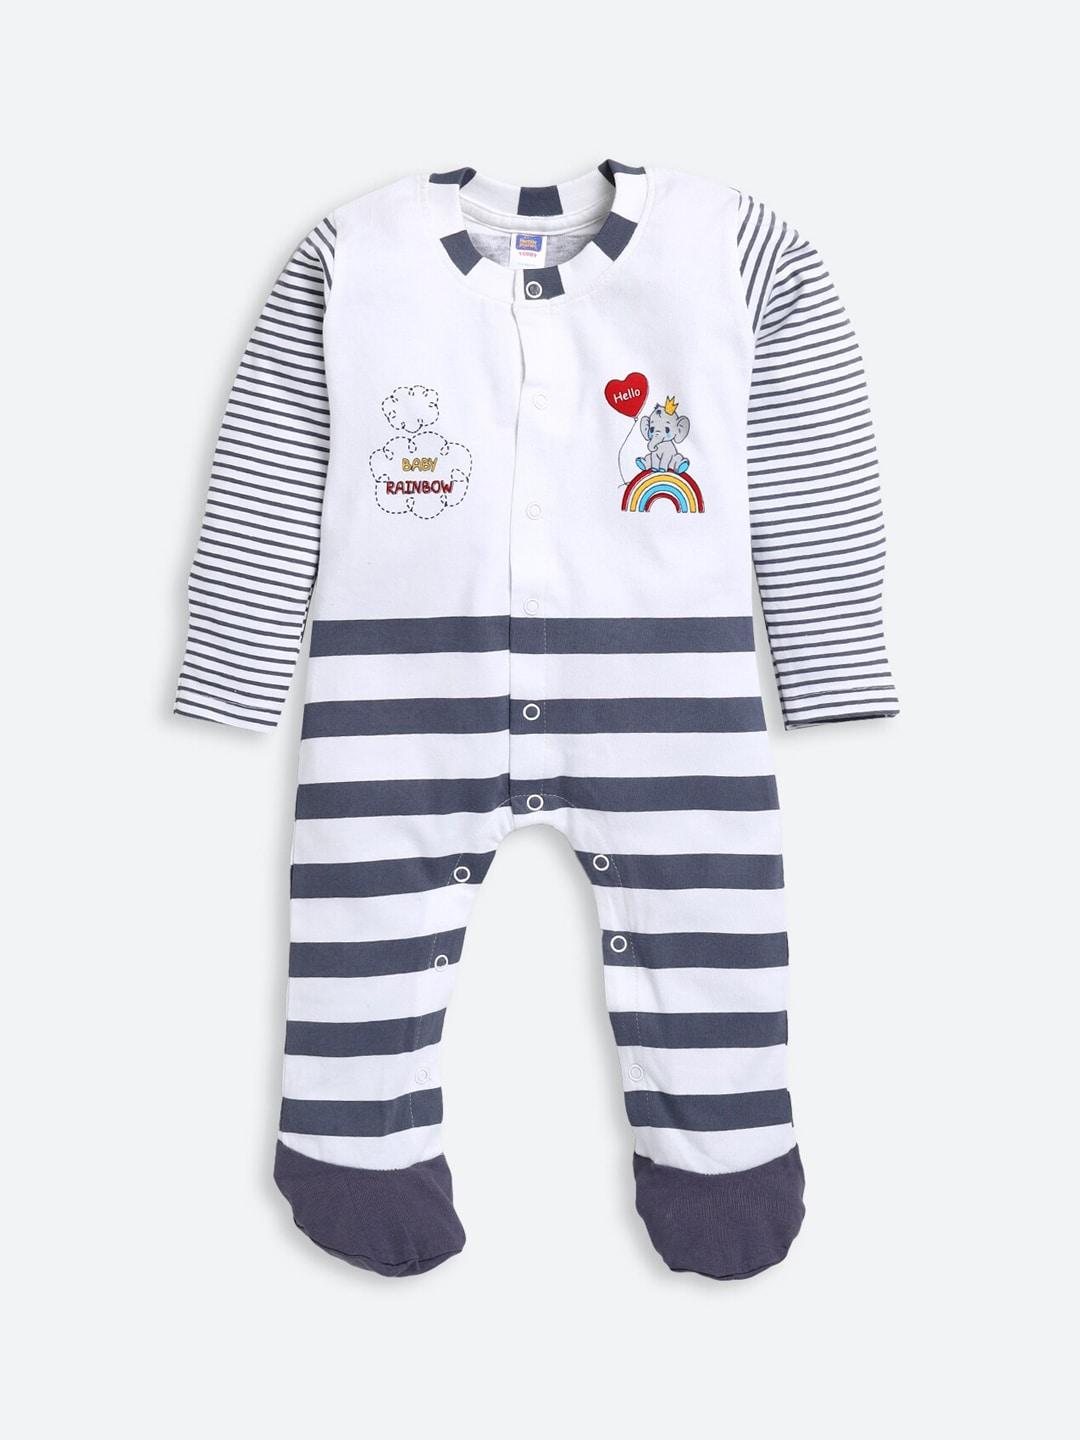 nottie-planet-kids-white-&-blue-printed-rompers